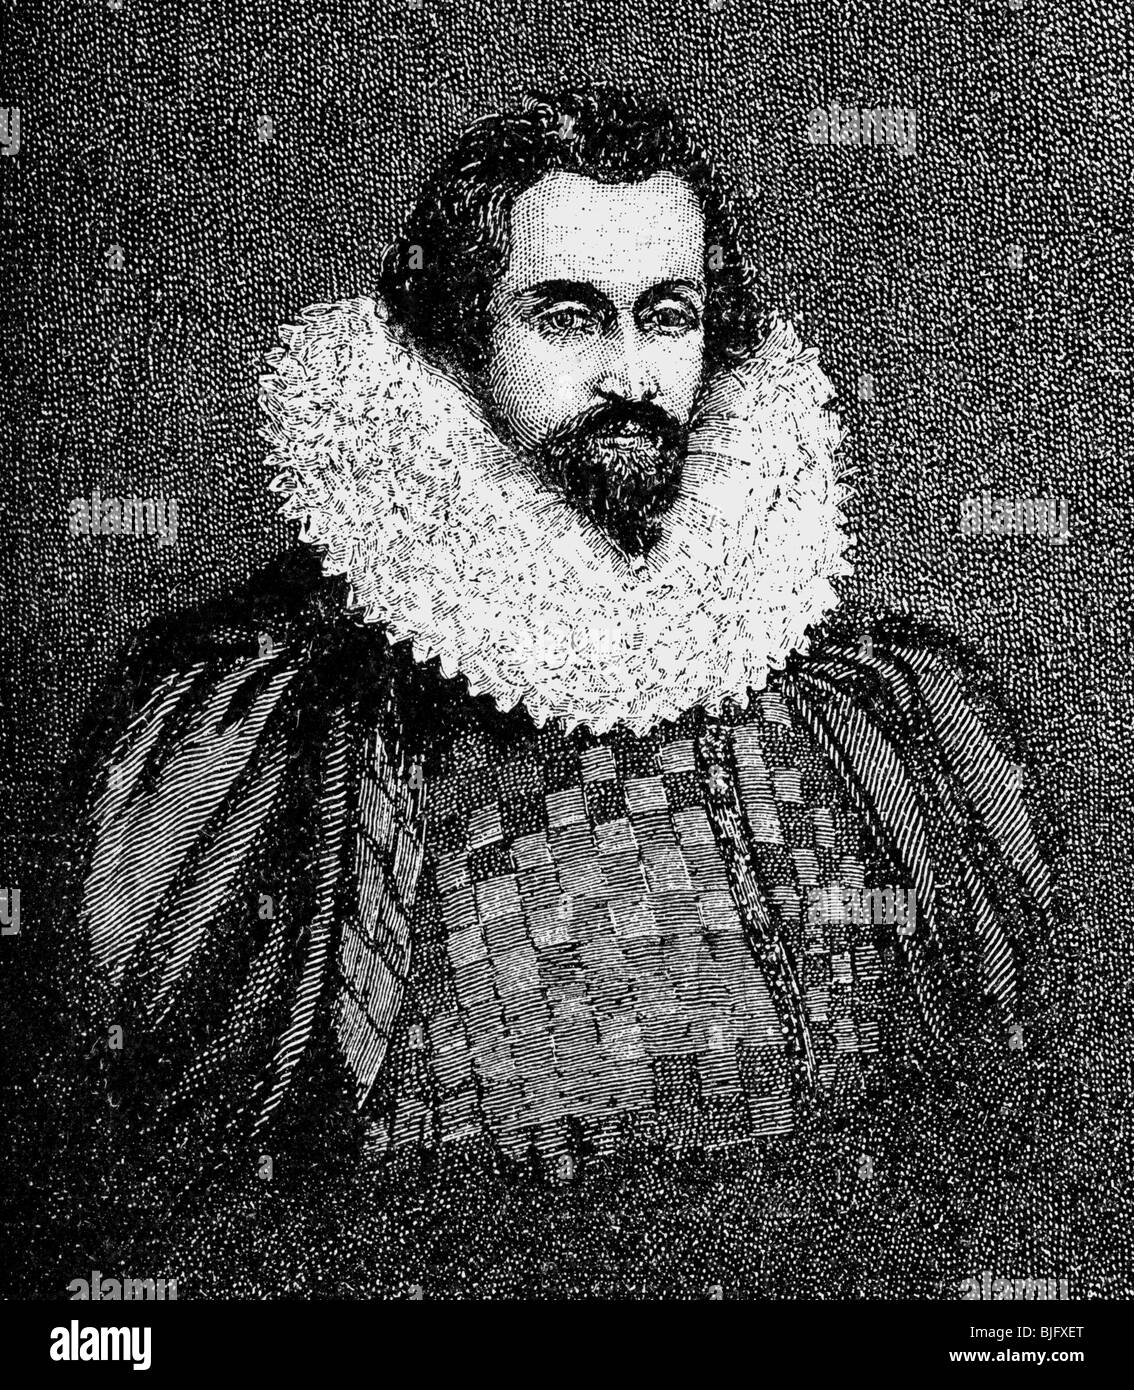 Devereux, Robert, 2nd Earl of Essex, 10.11.1565 - 25.2.1601, English courtier and general, portrait, wood engraving, 19th century,  , Stock Photo